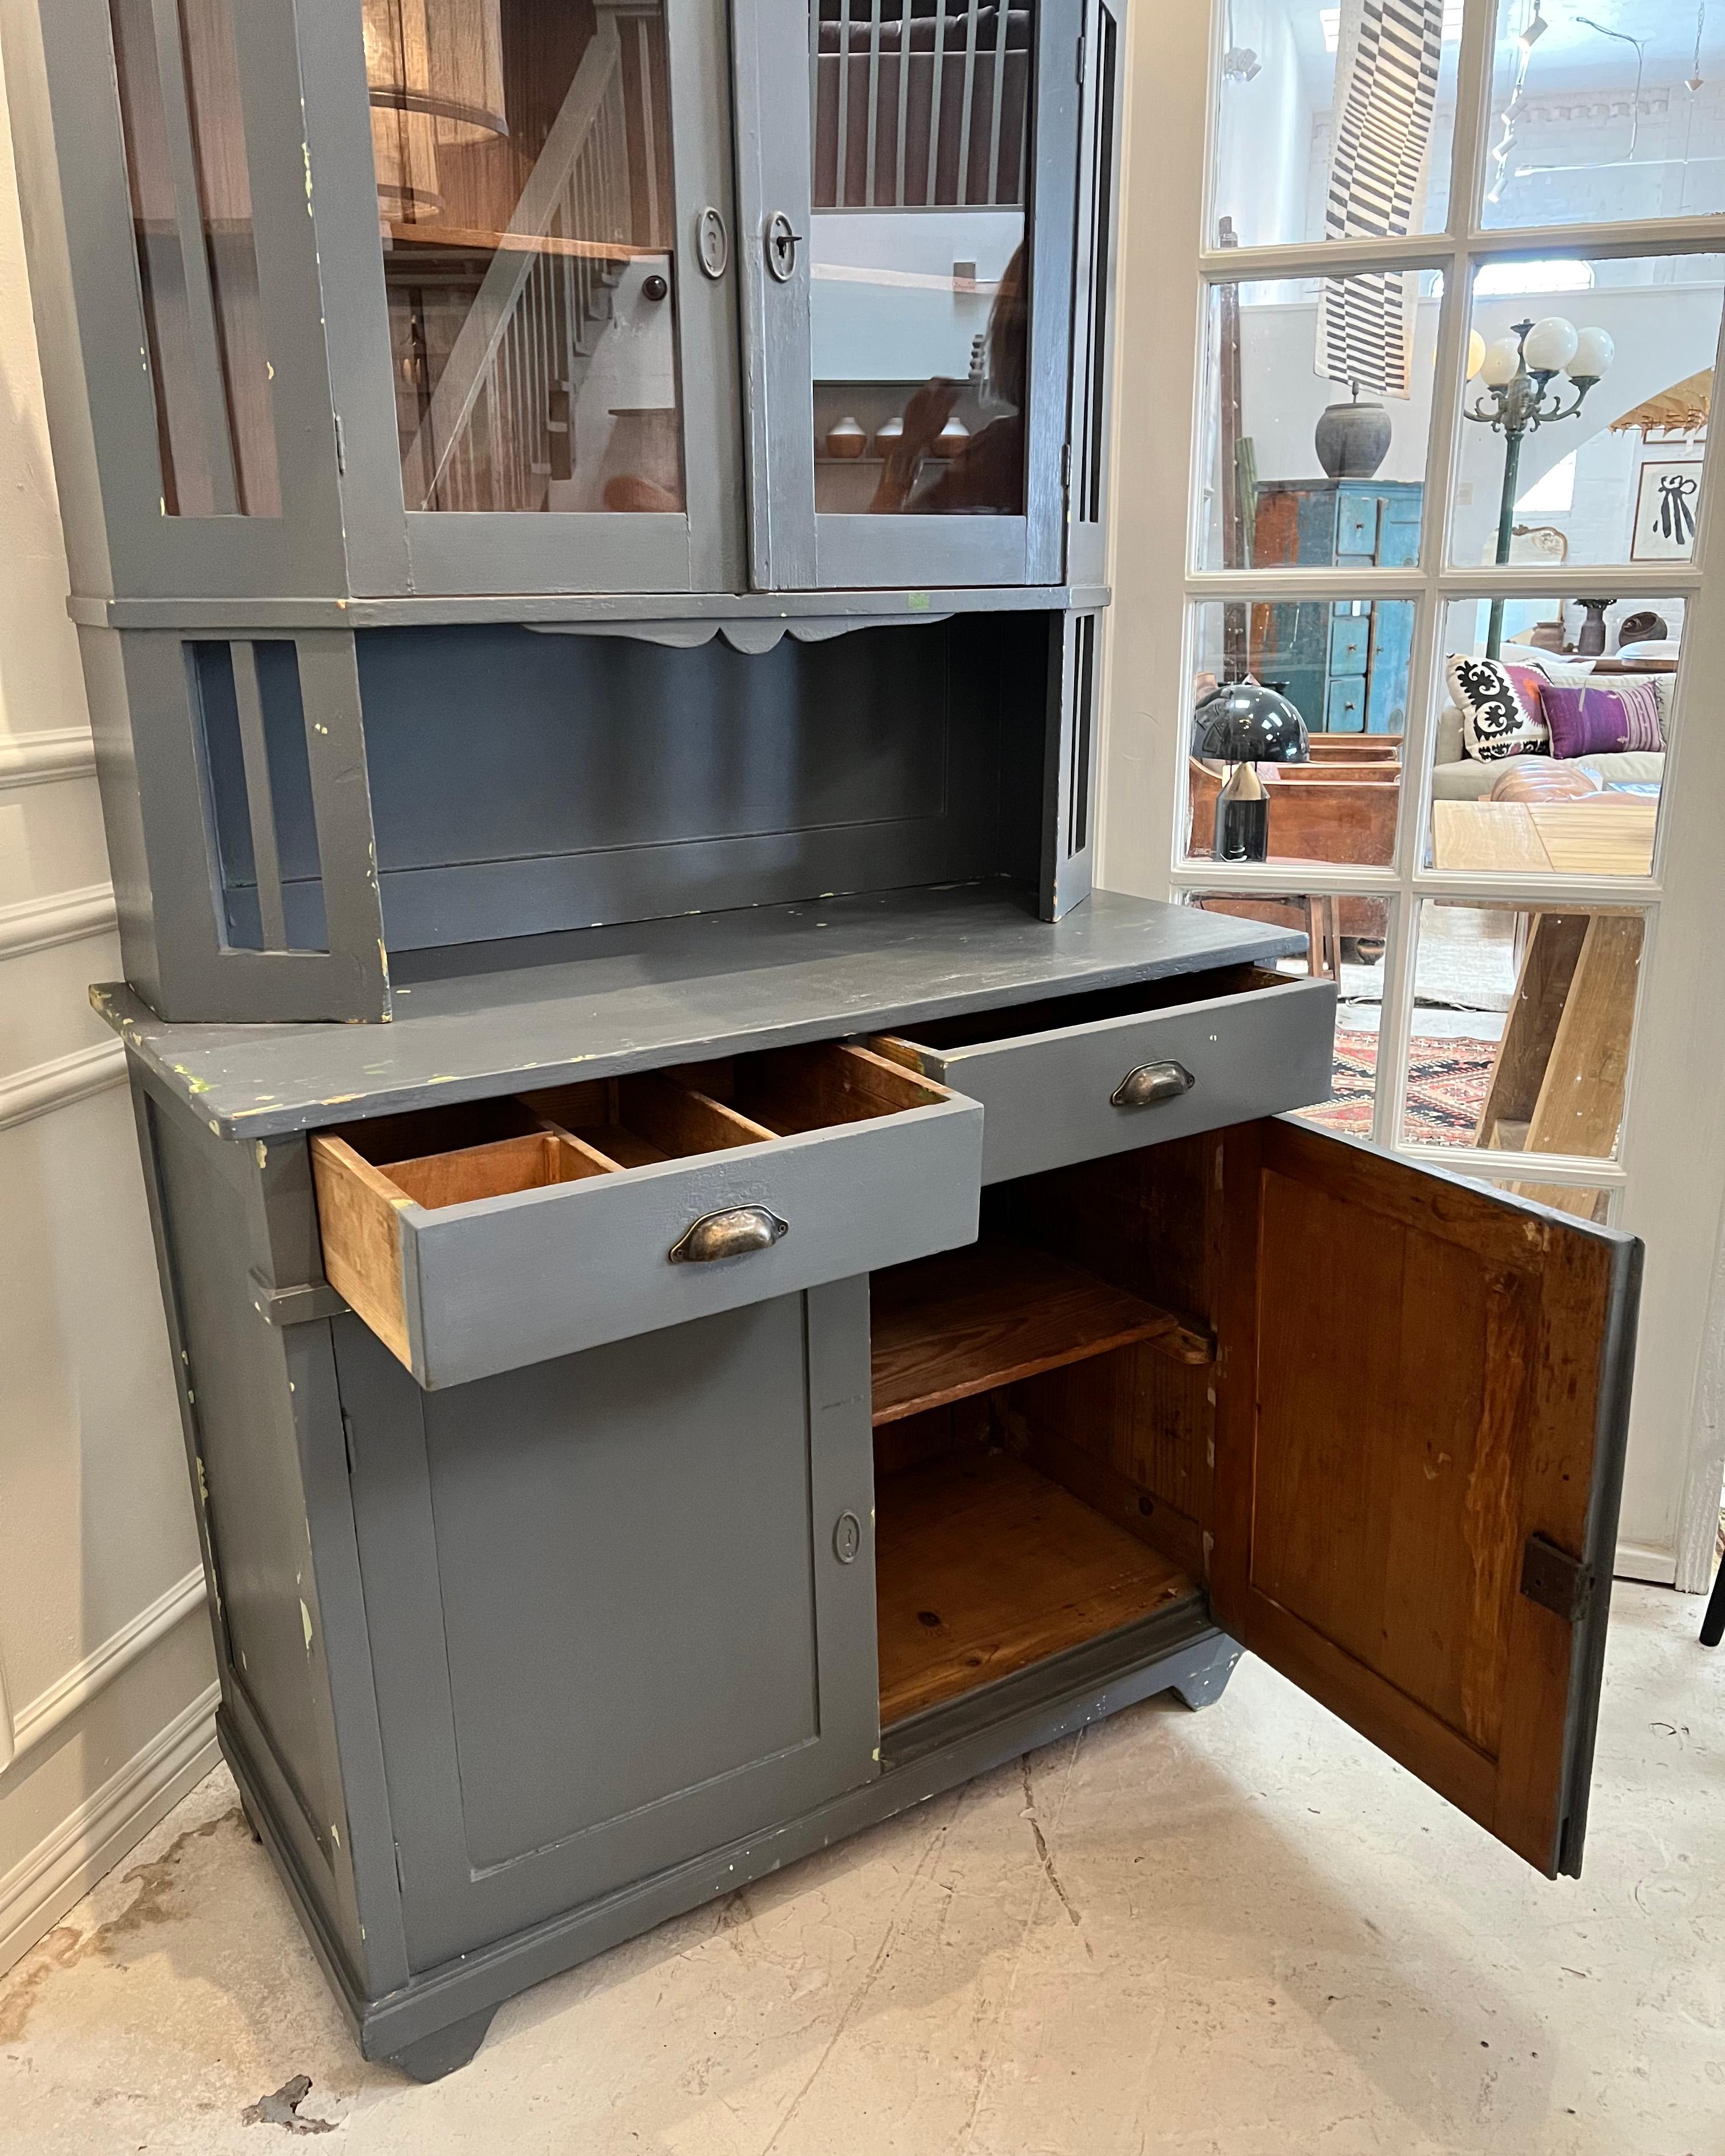 Vintage French handcrafted cabinet with Hutch, an unique design featuring glass doors.